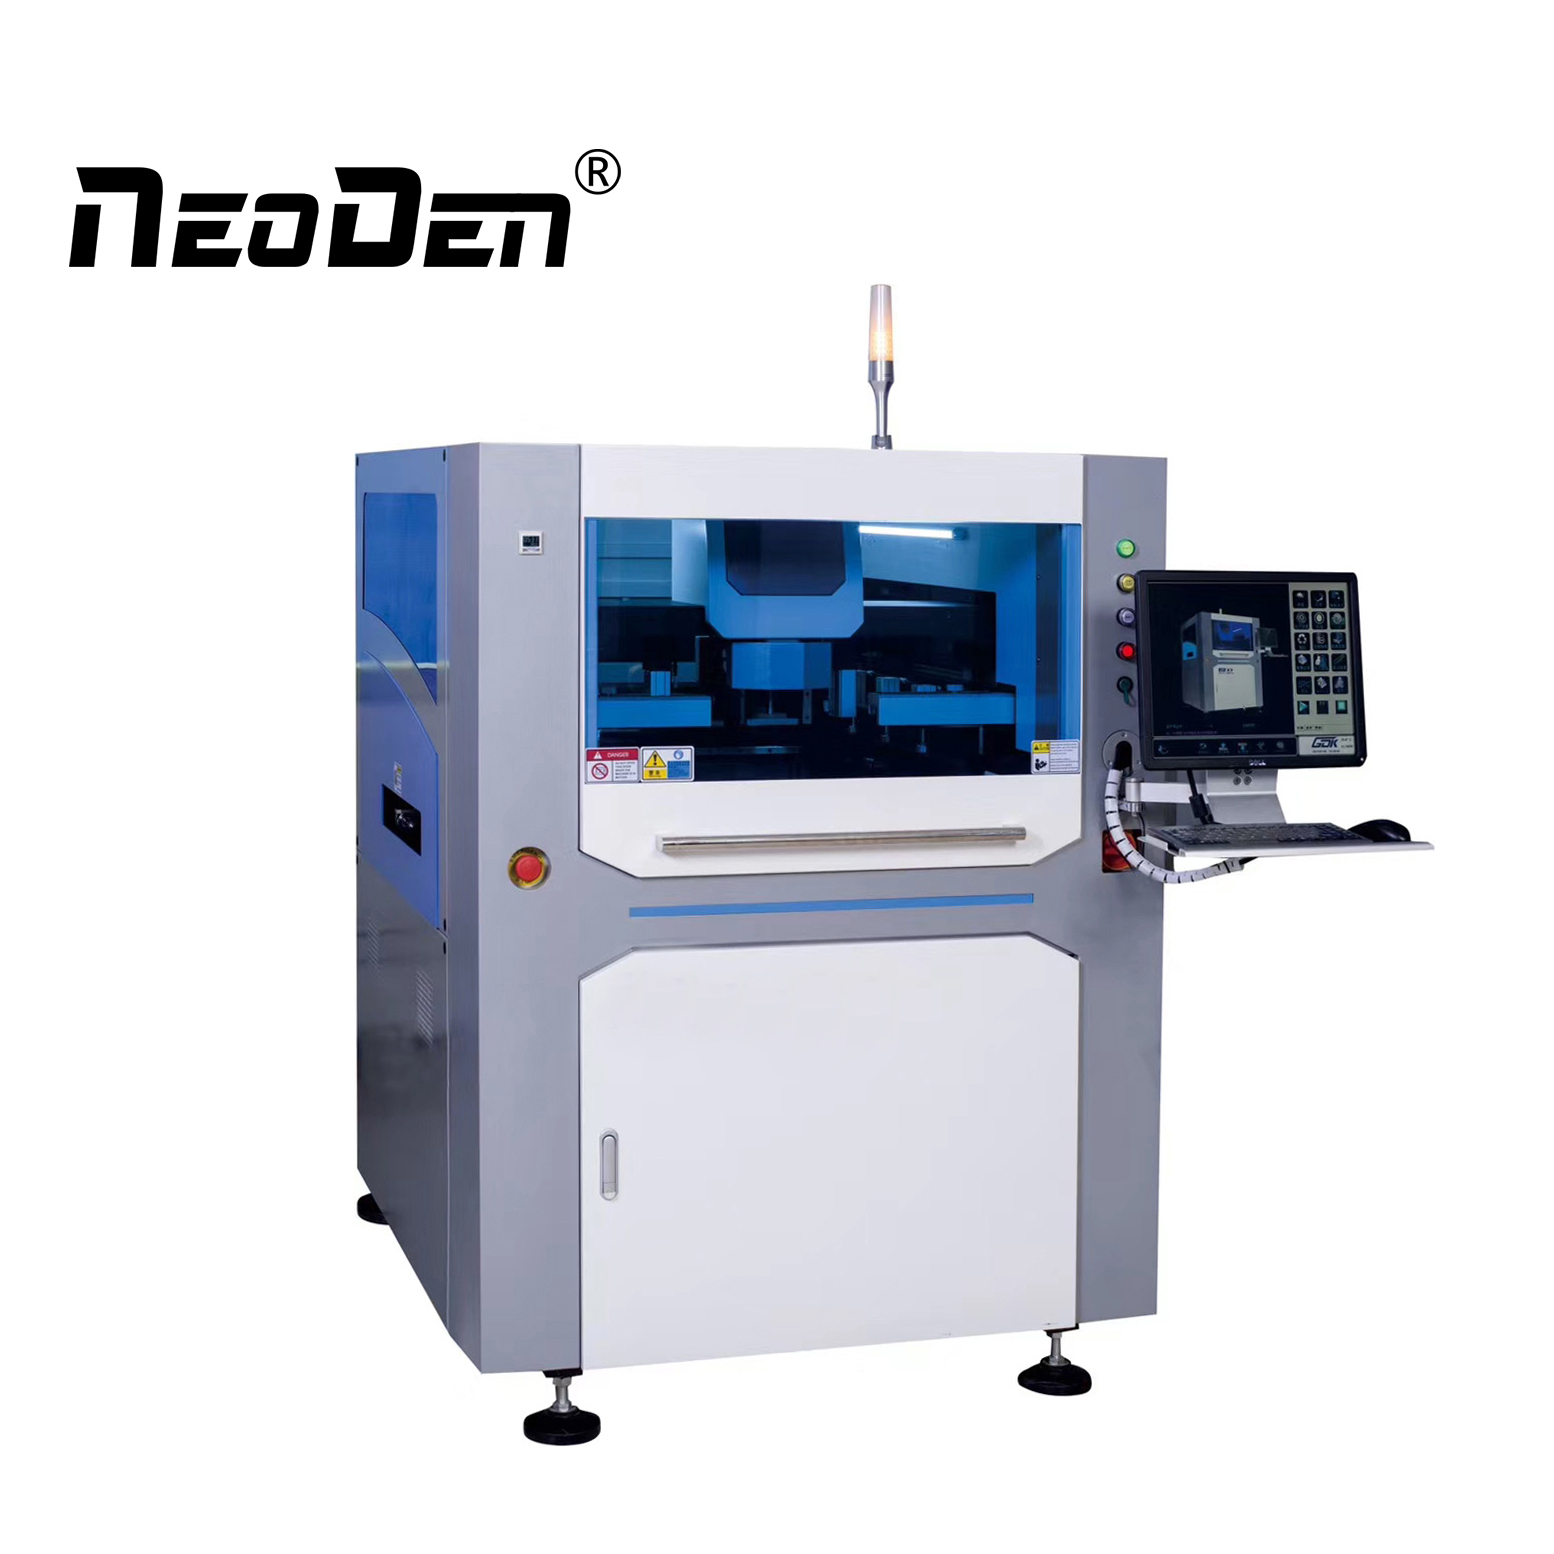 How To Install and Adjust The Stencil on Automatic SMT Printing Machine?